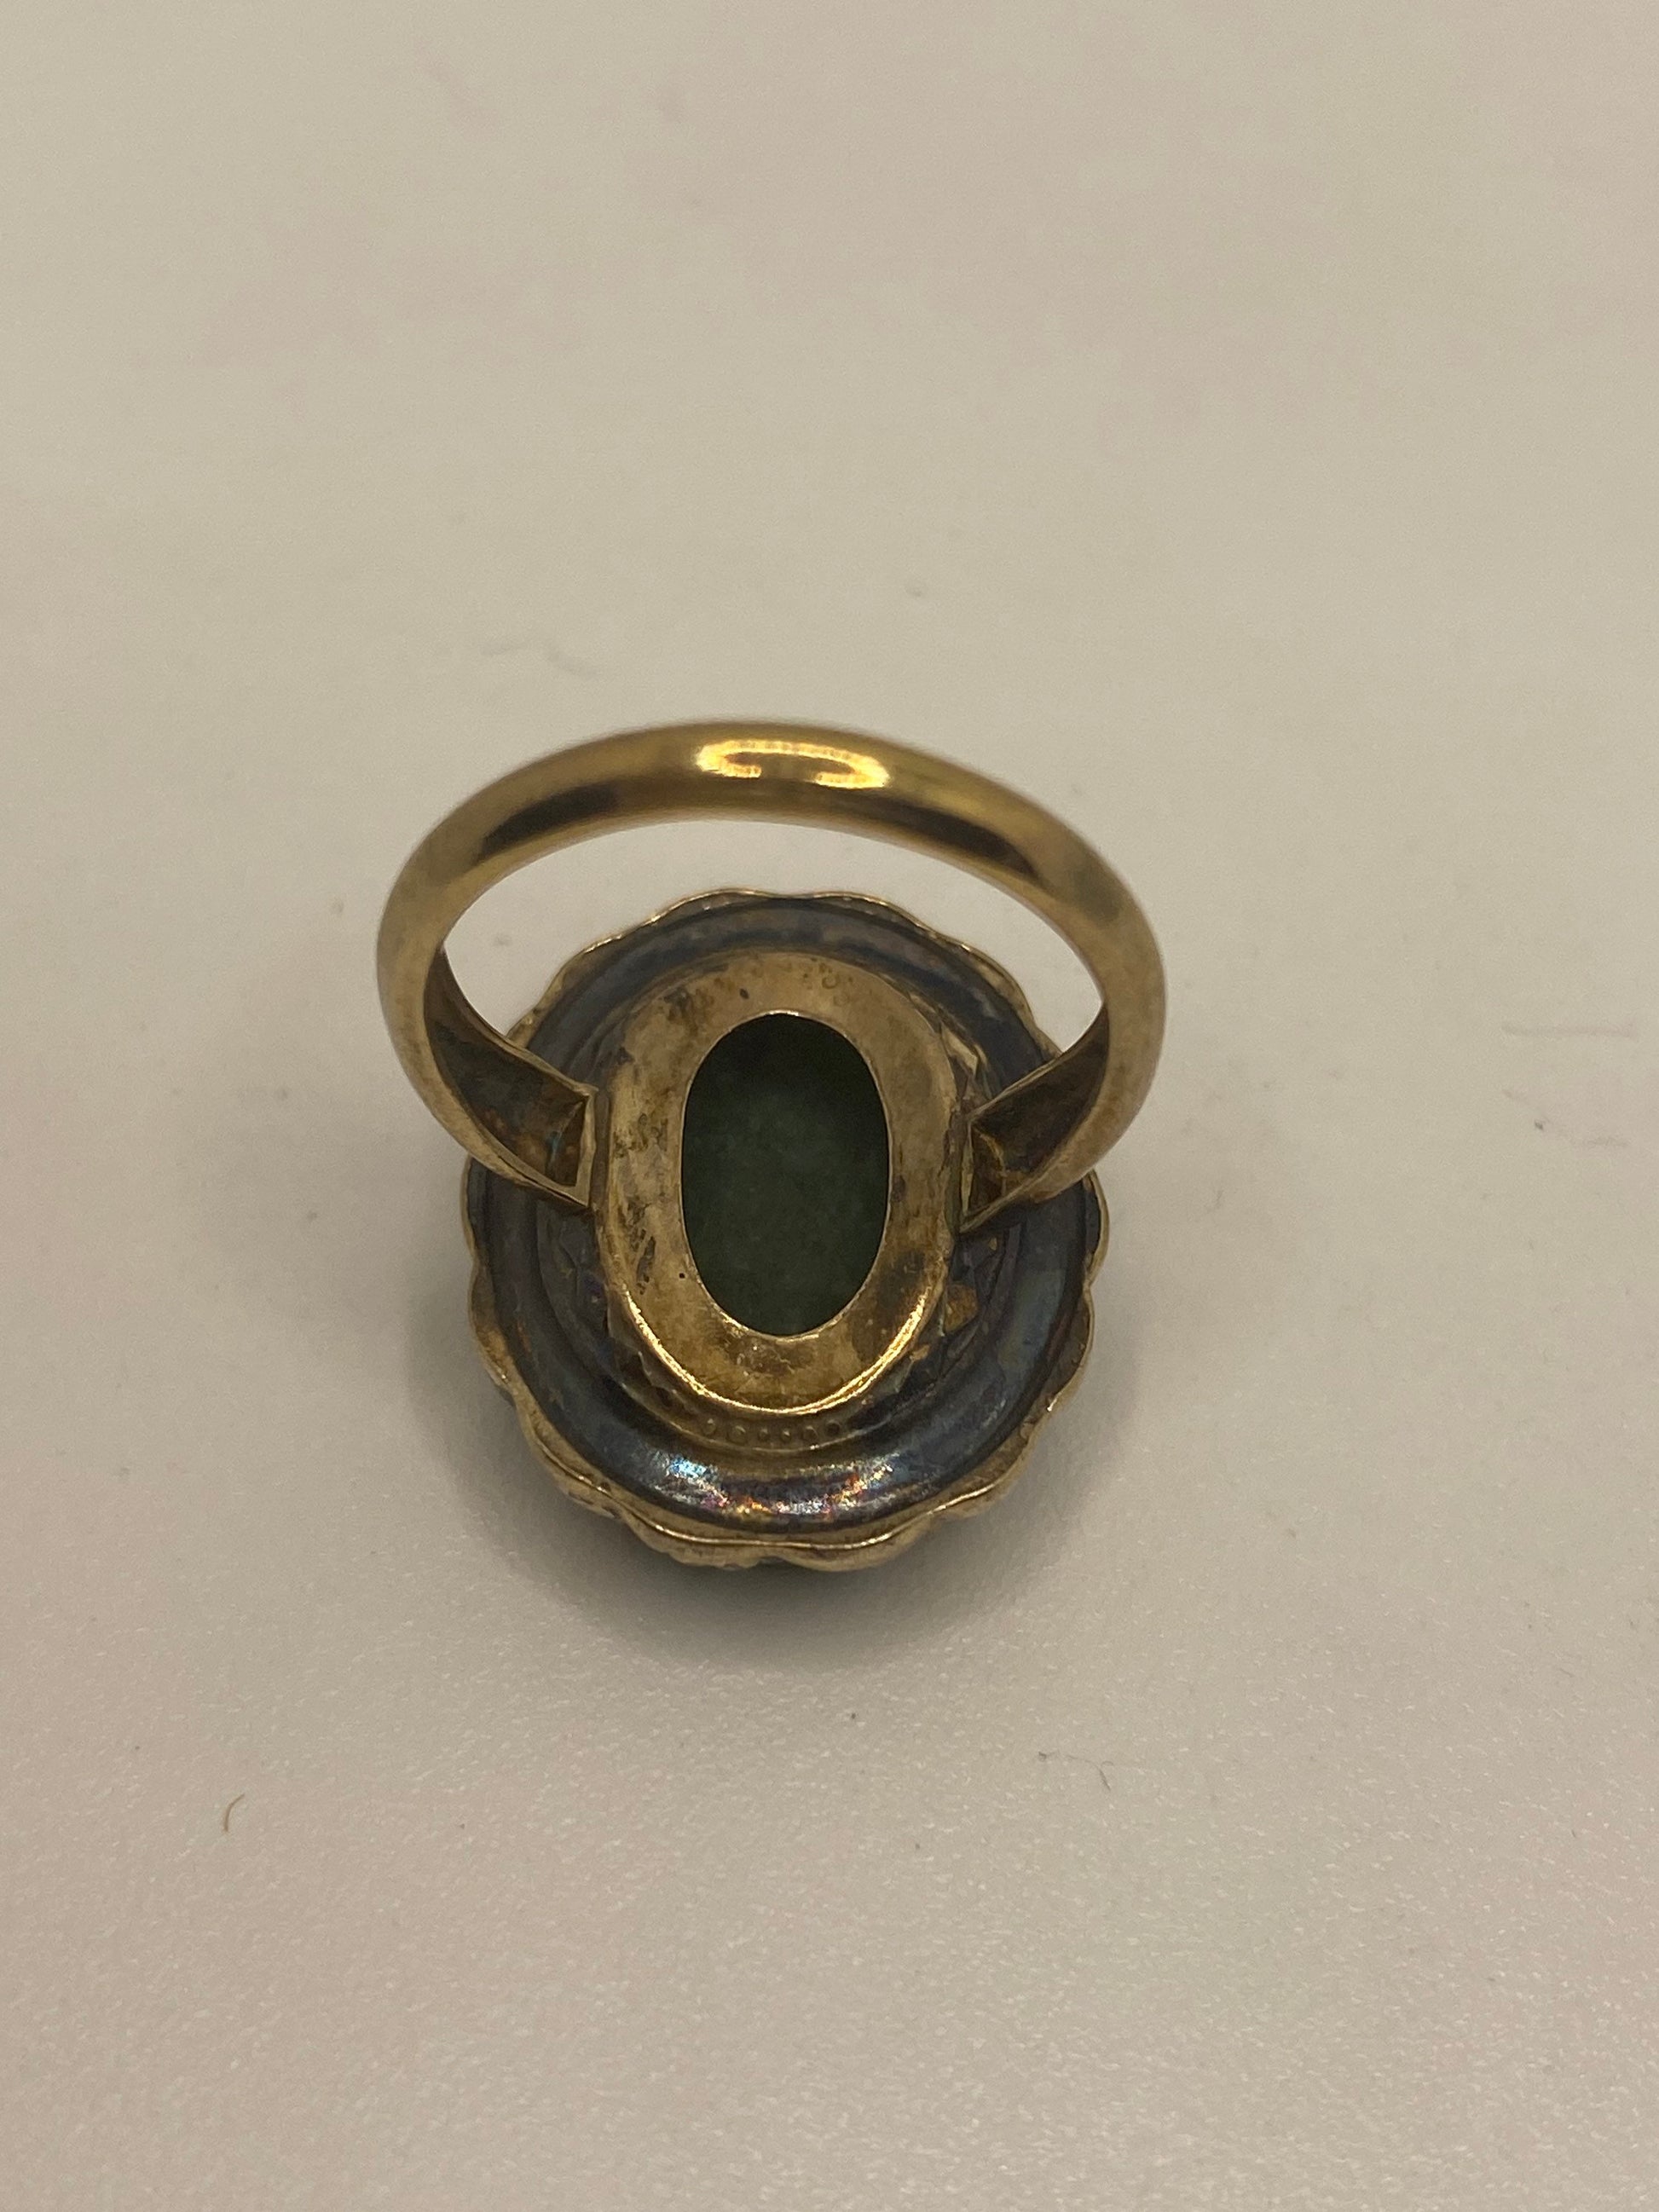 Vintage Lucky Green Nephrite Jade Ring Gold Filled